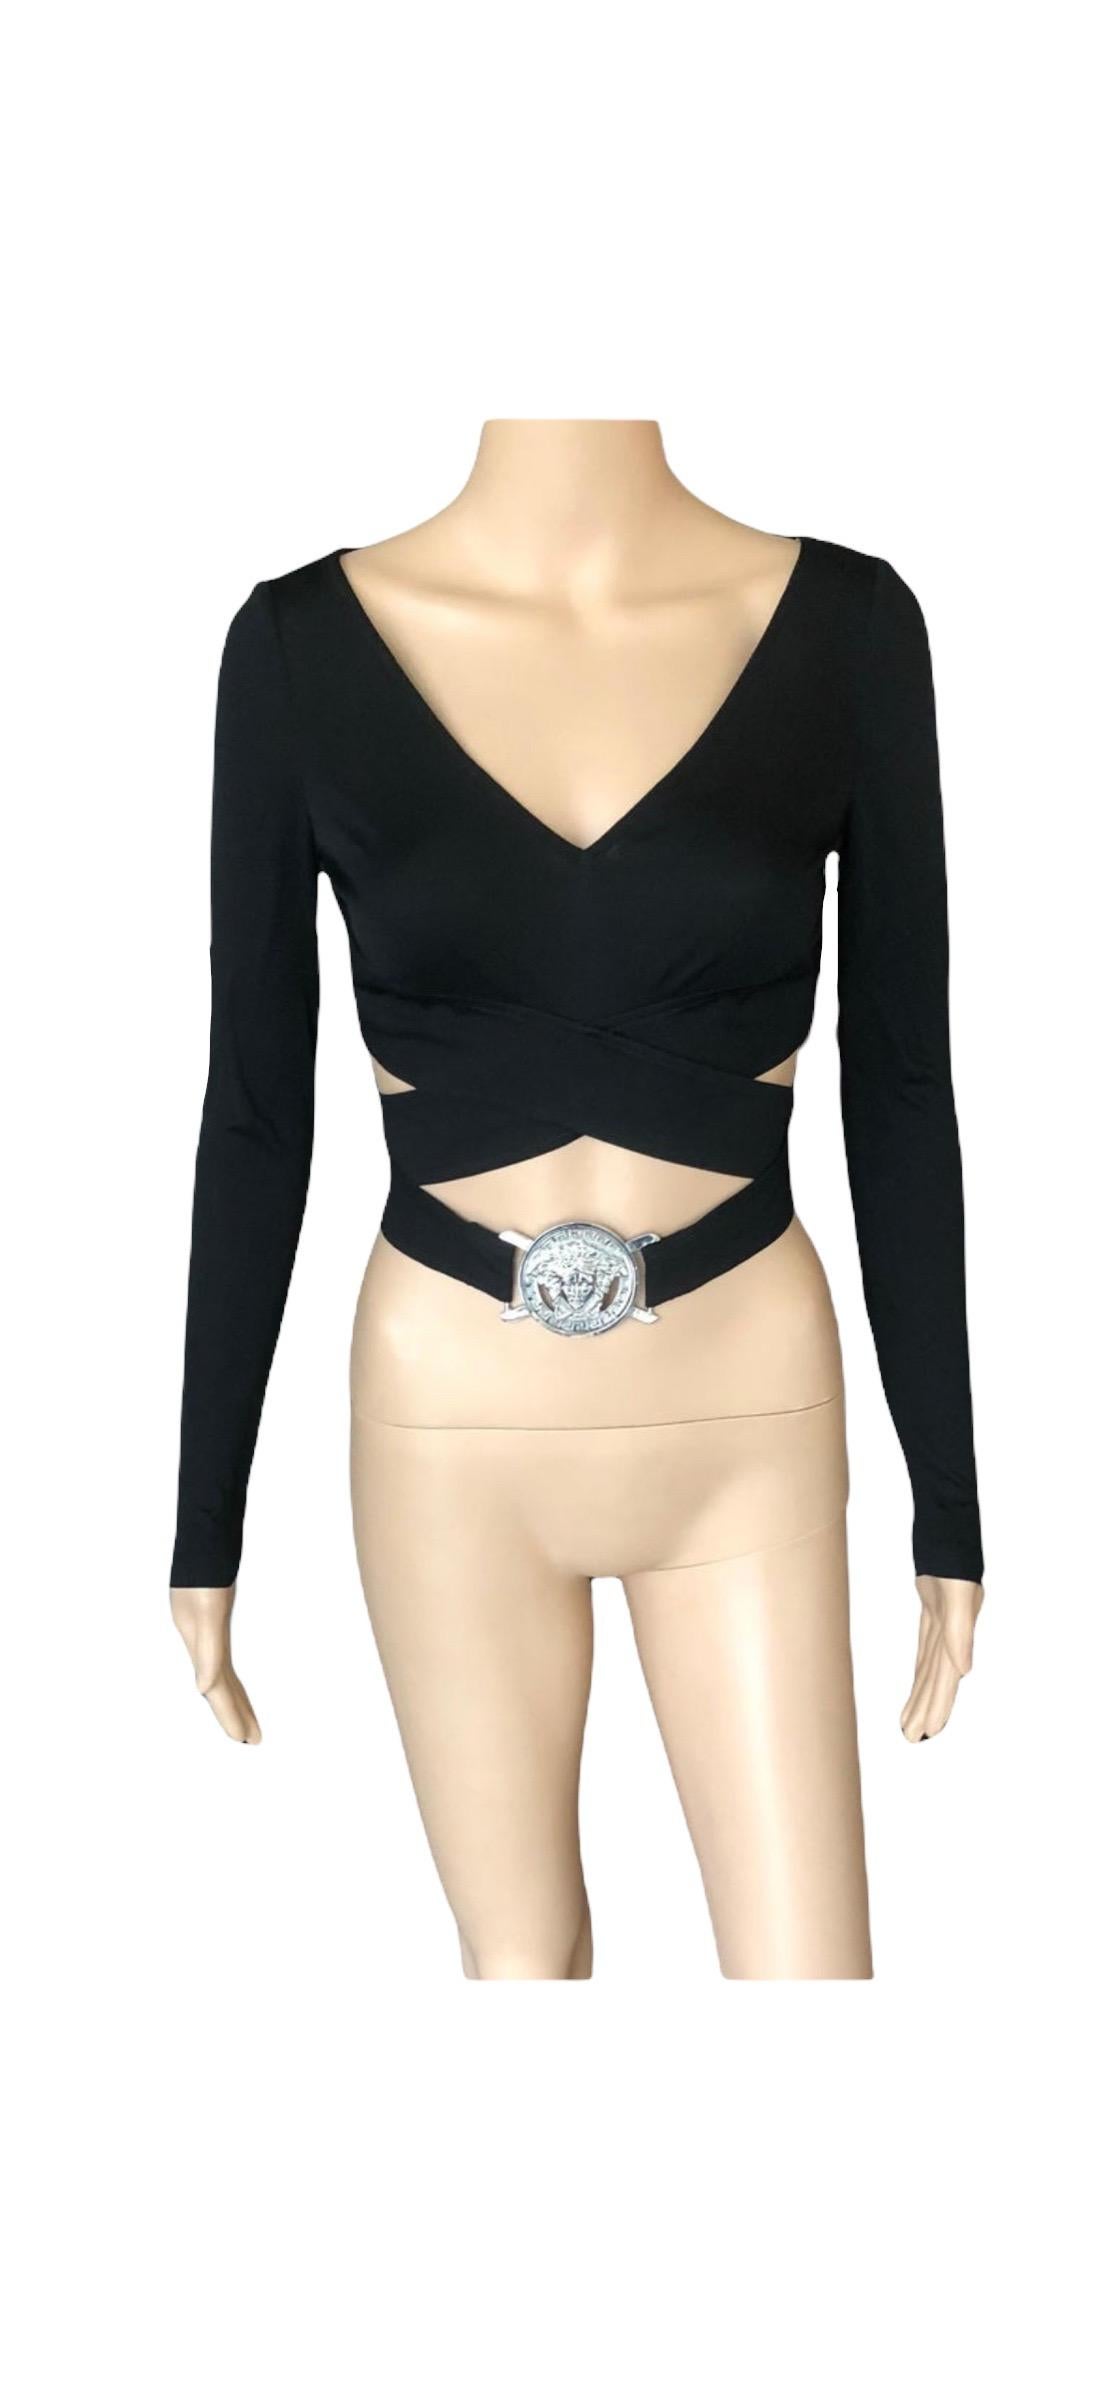 Versace S/S 2005 Embellished Belted Plunging Wrap Crop Top For Sale 5